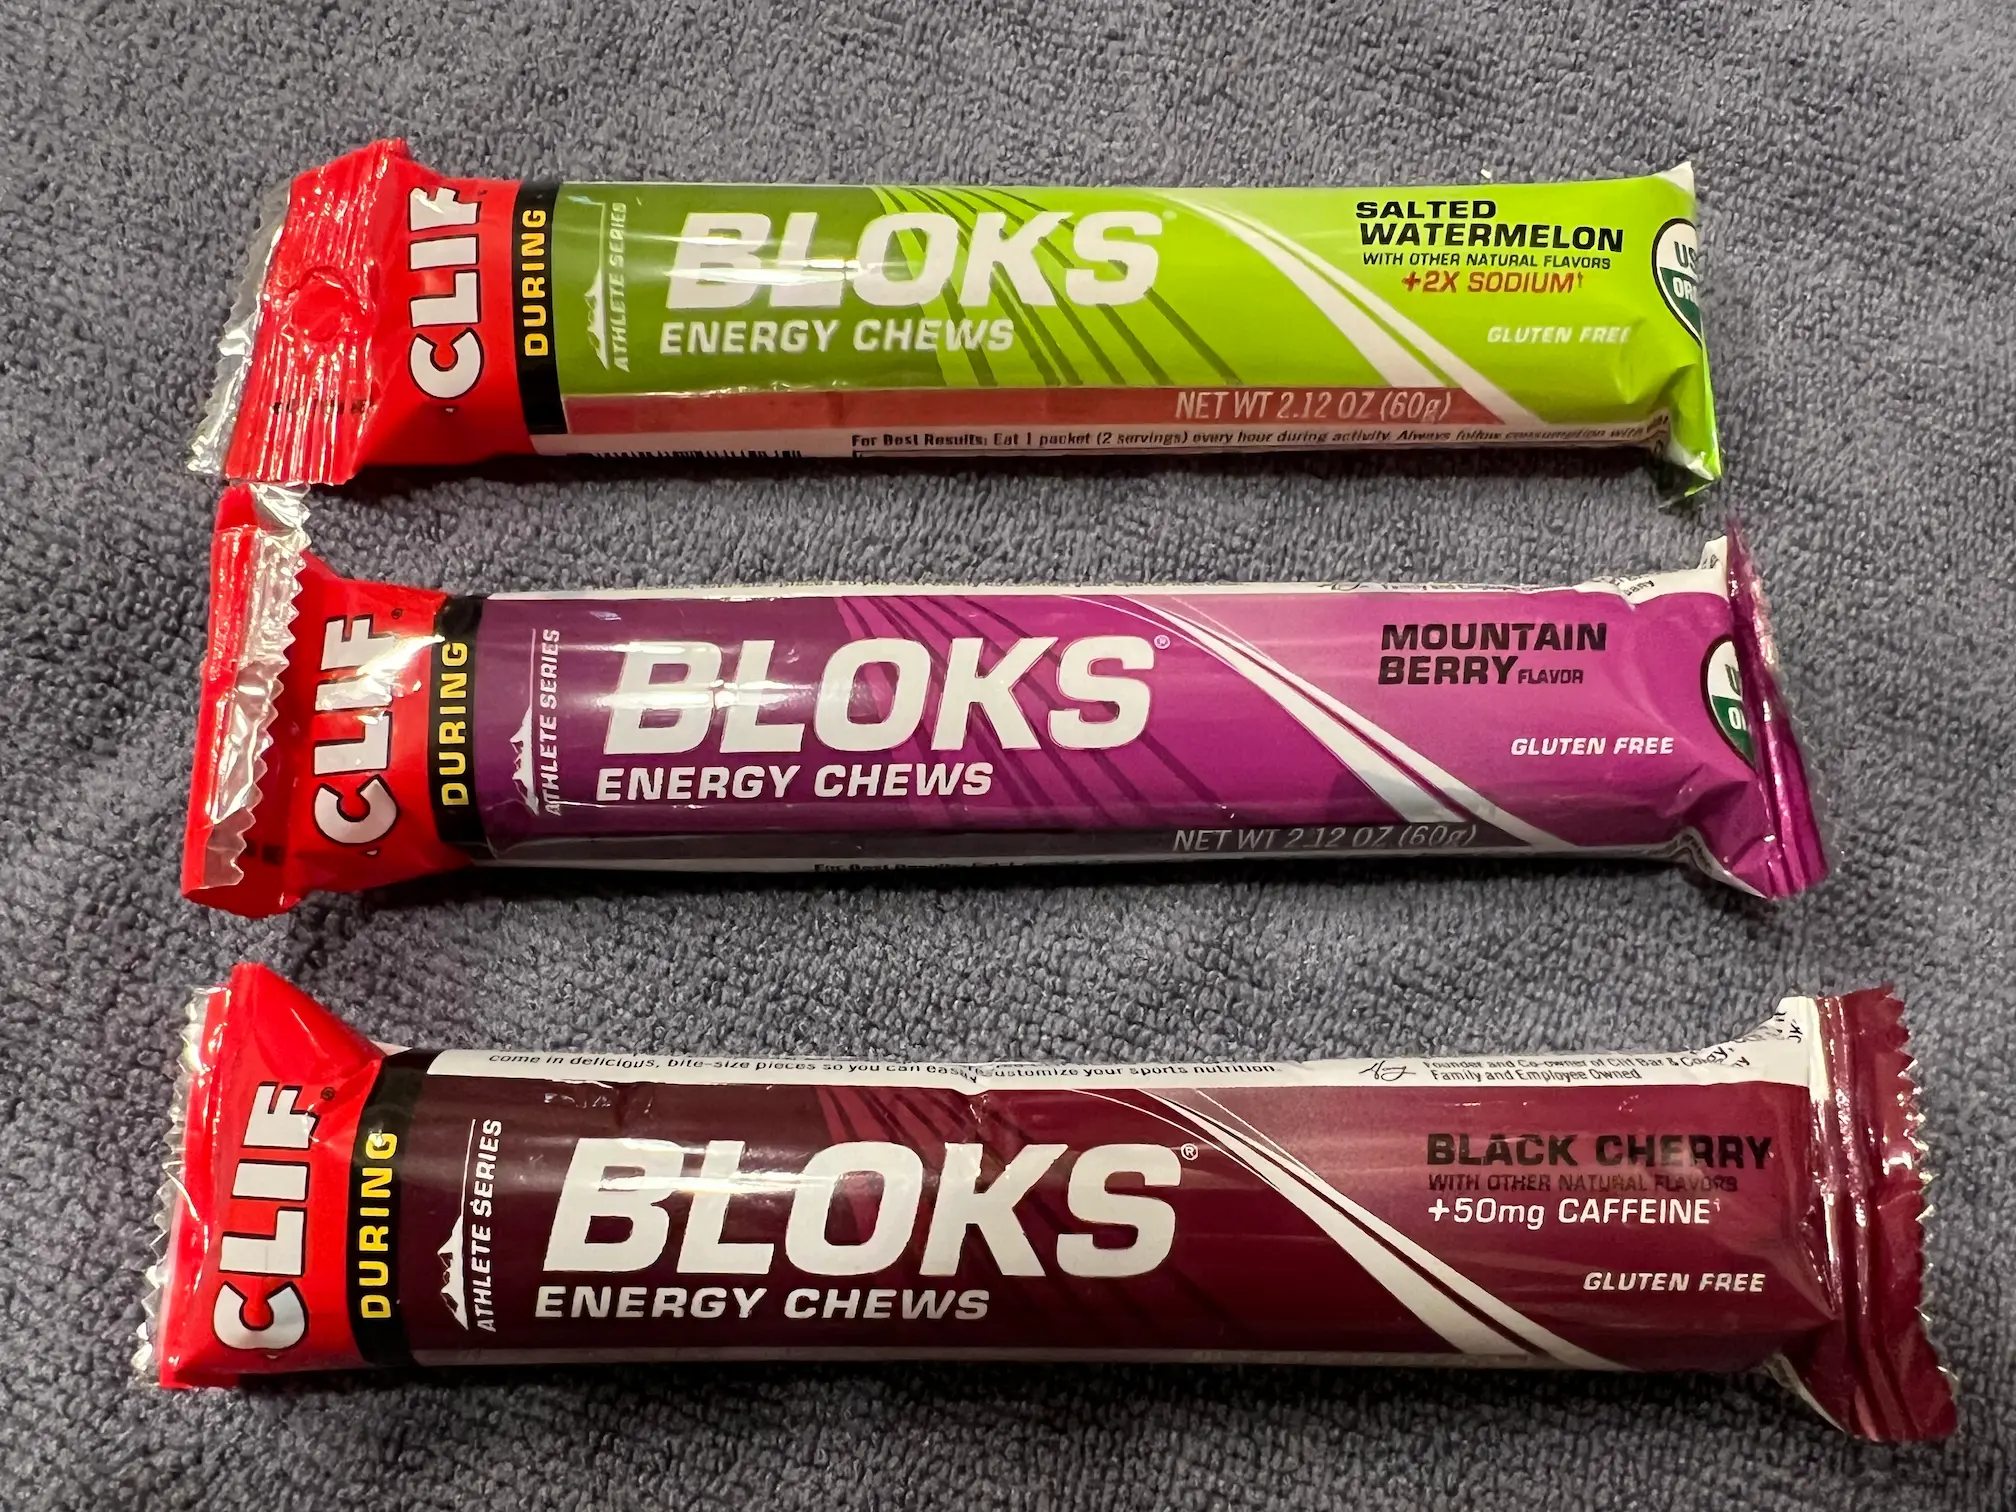 I carried these three packs of Clif Bloks during the gravel race.